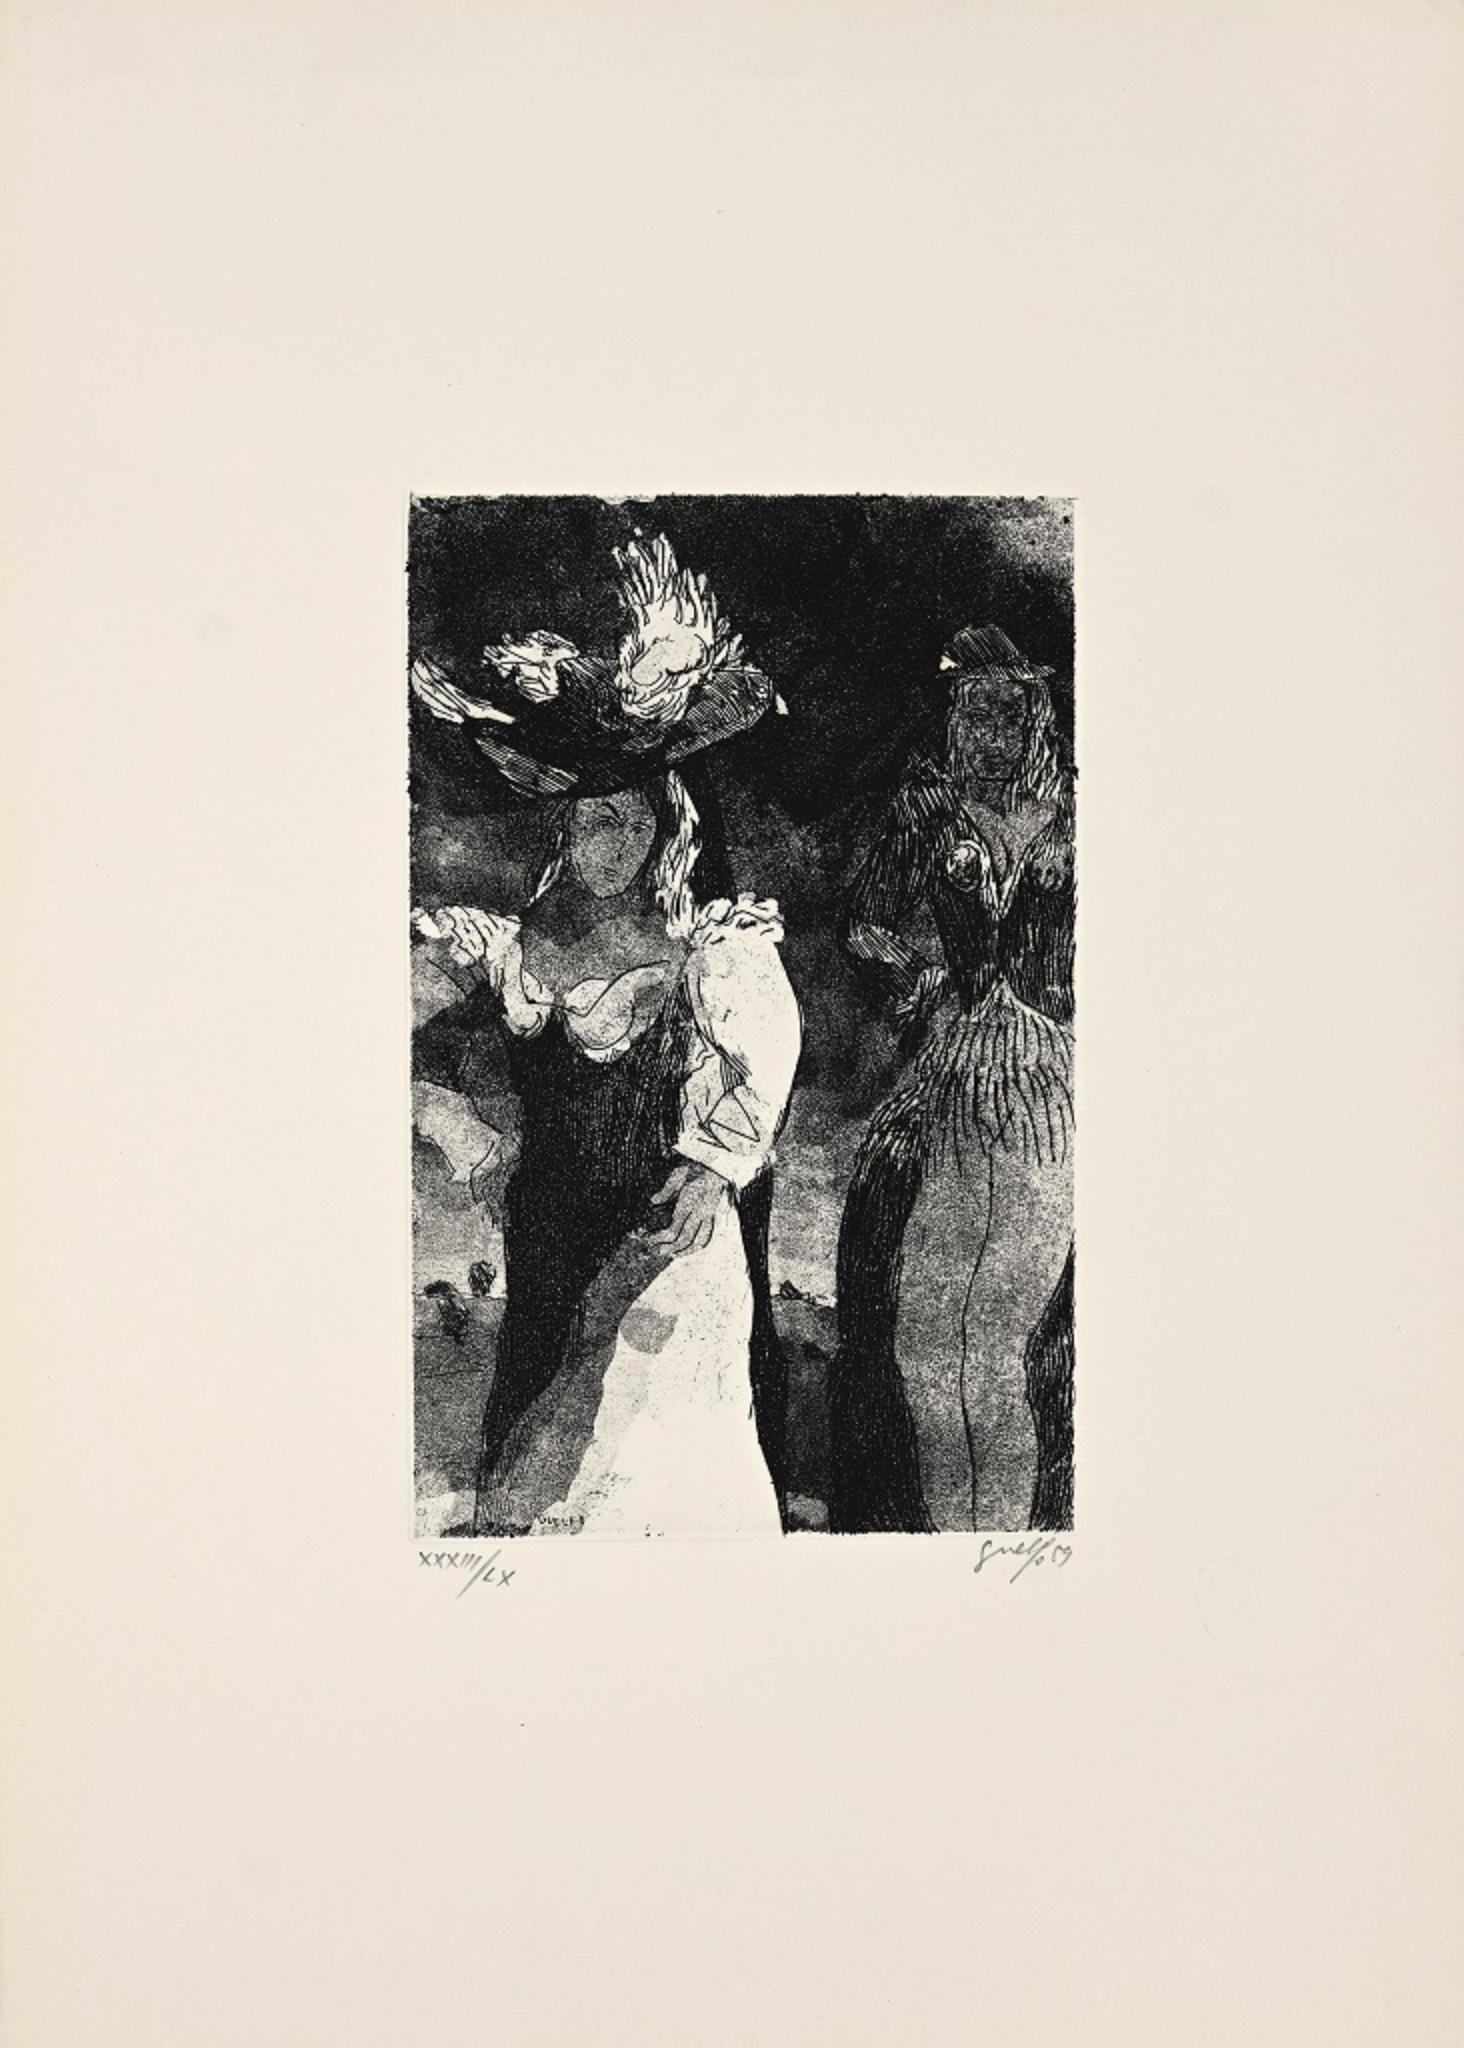 Night Dream is an original etching realized by Guelfo Bianchini in 1959.

The artwork is hand-signed by the artist on the lower right corner, and numbered (33/60) on the lower left corner.

In very good conditions and mounted on a white cardboard